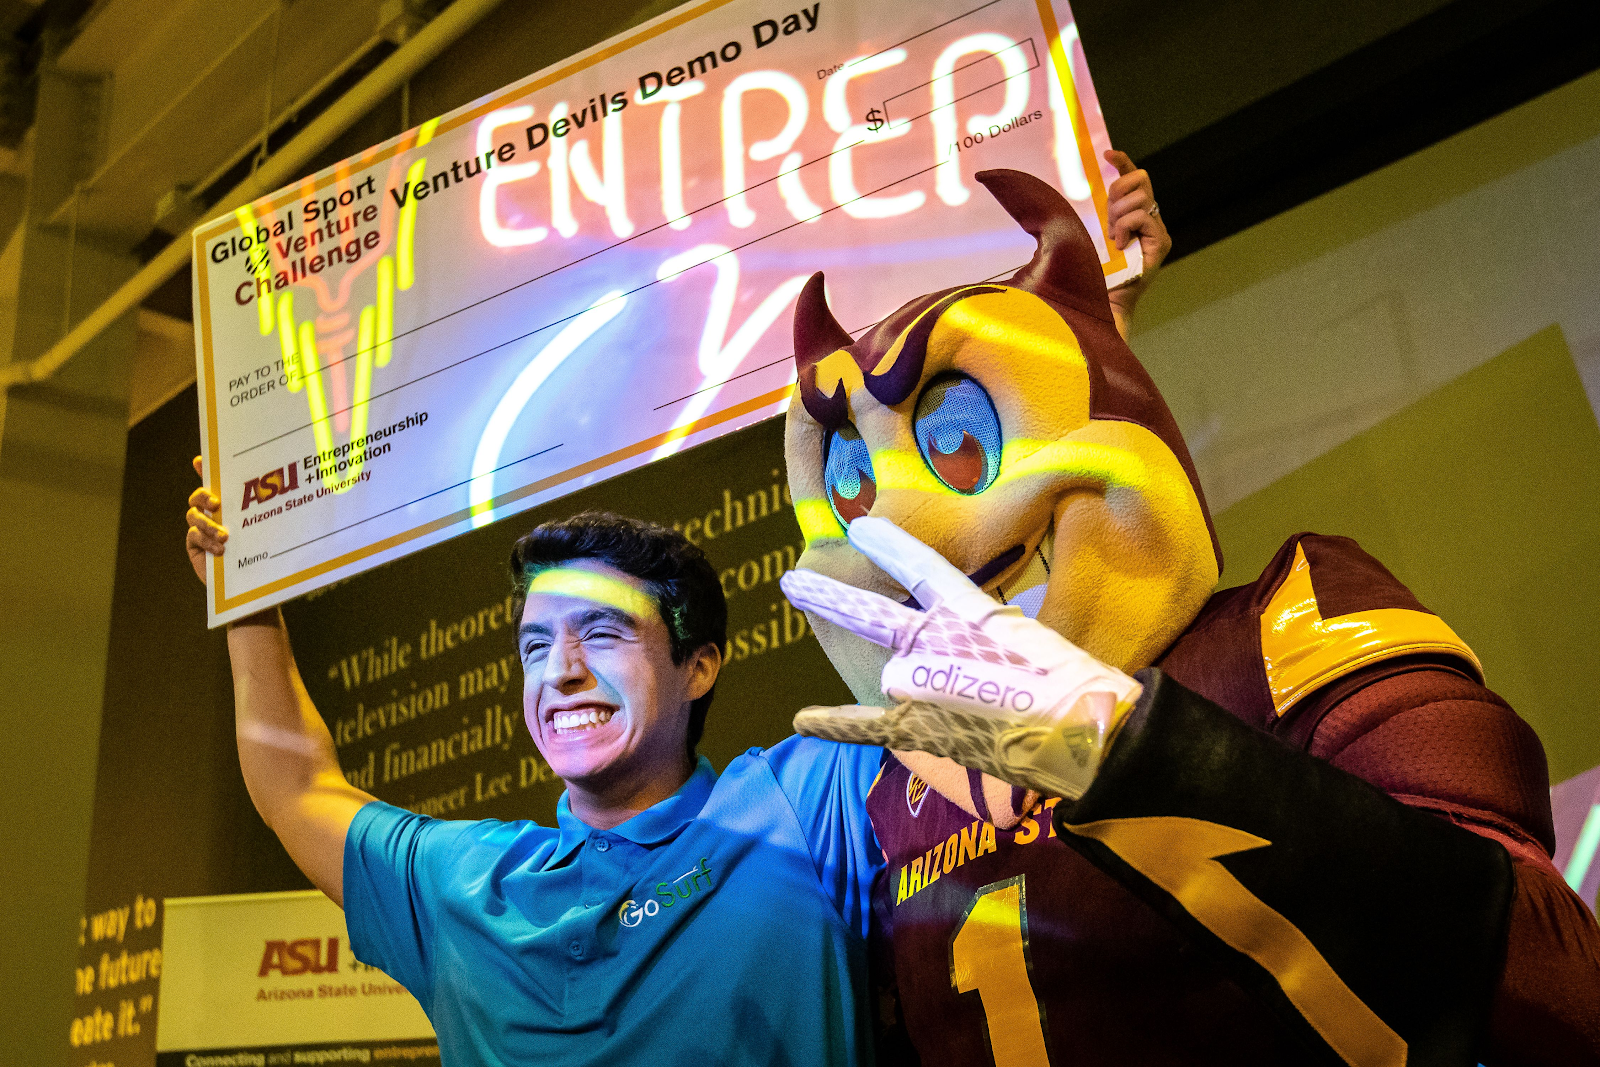 Aleksei Stojanovic, founder of GoSurf, poses at Venture Devils Demo Day with ASU mascot and giant check